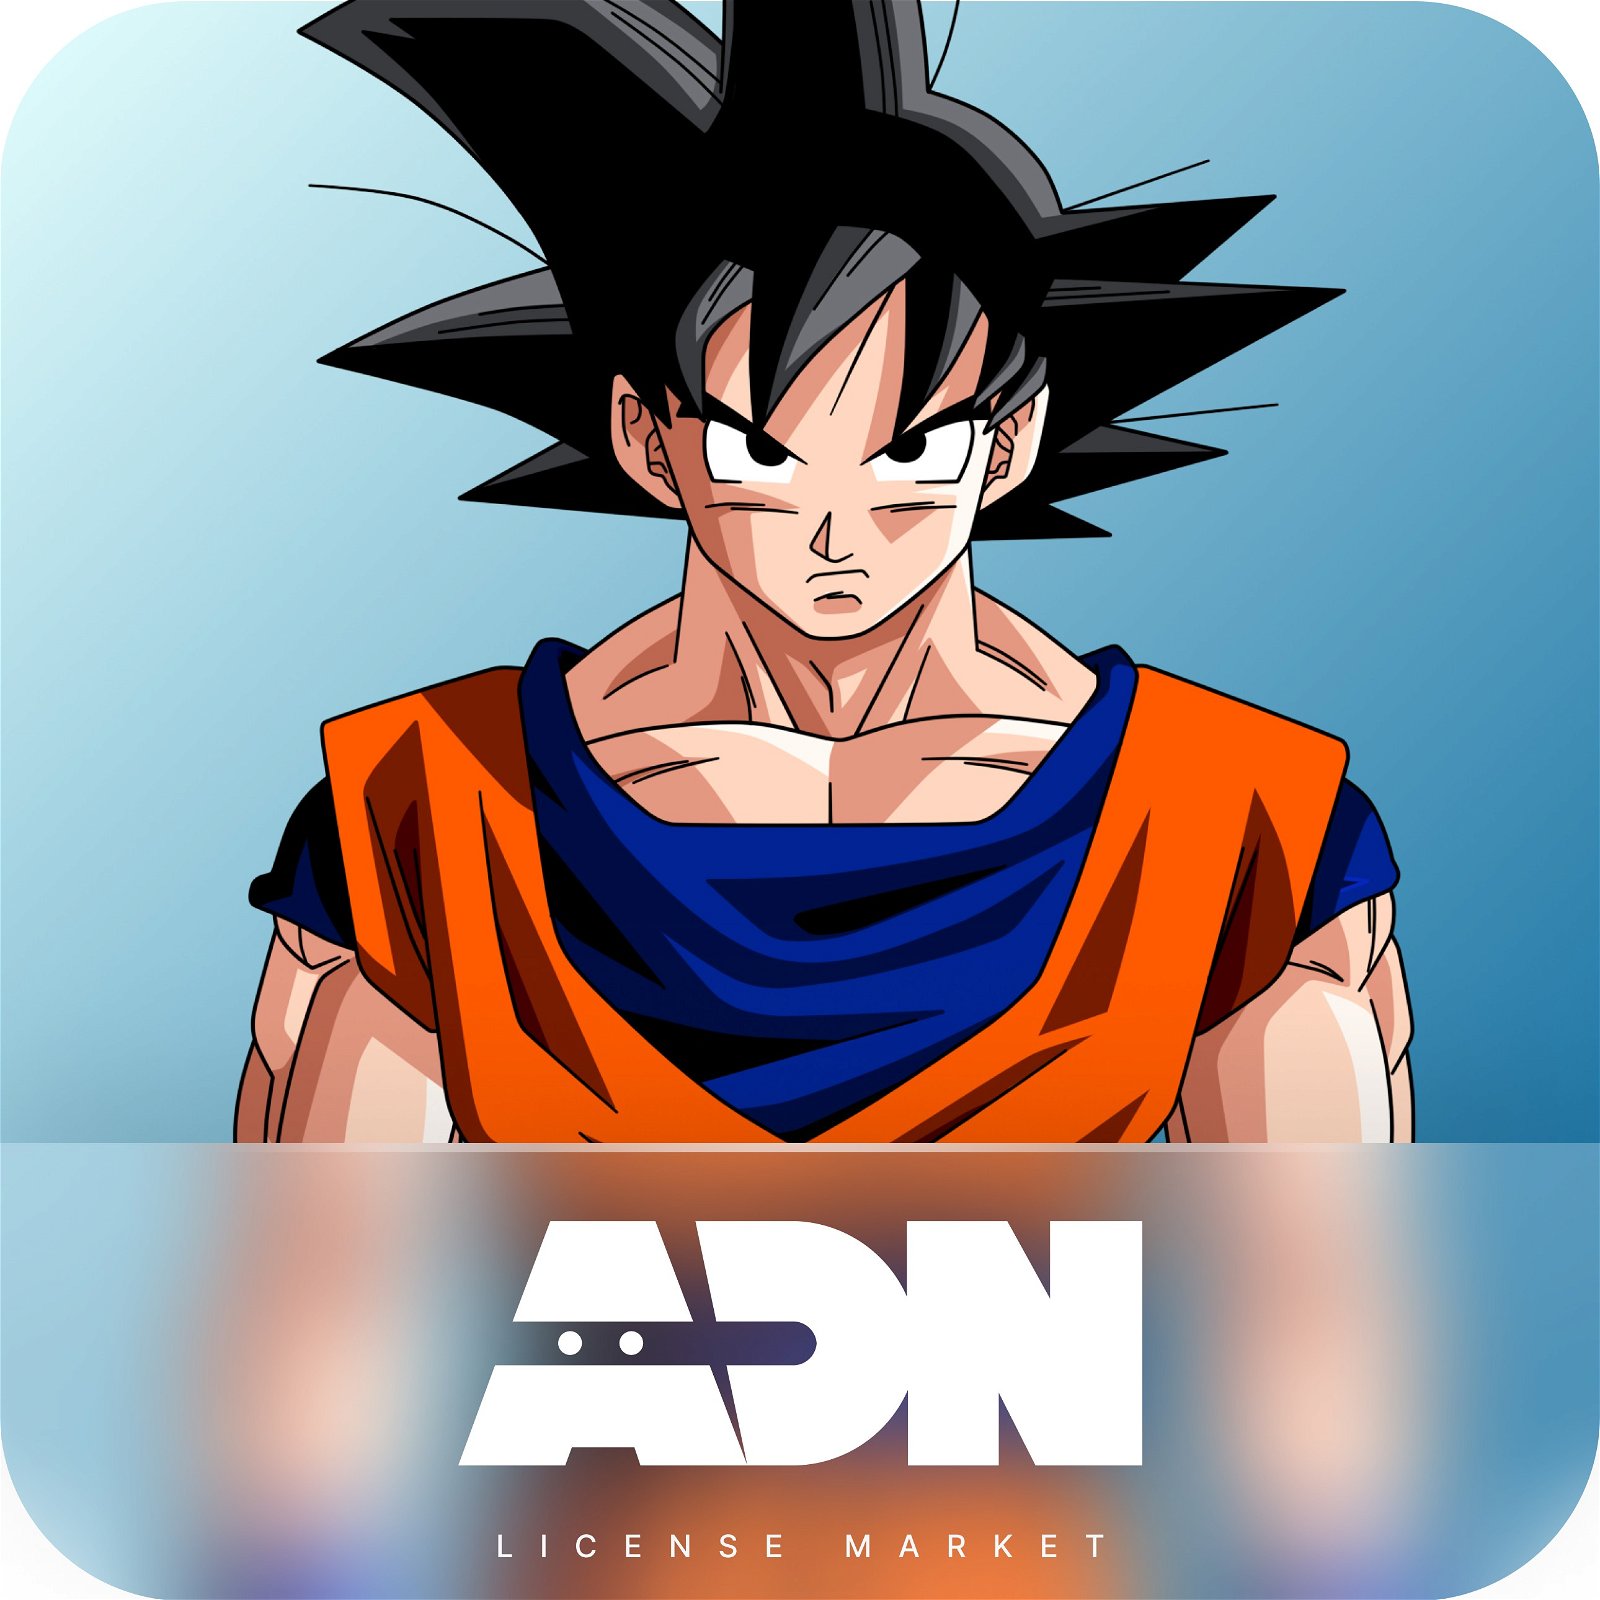 ADN - Anime Digital Network - APK Download for Android | Aptoide